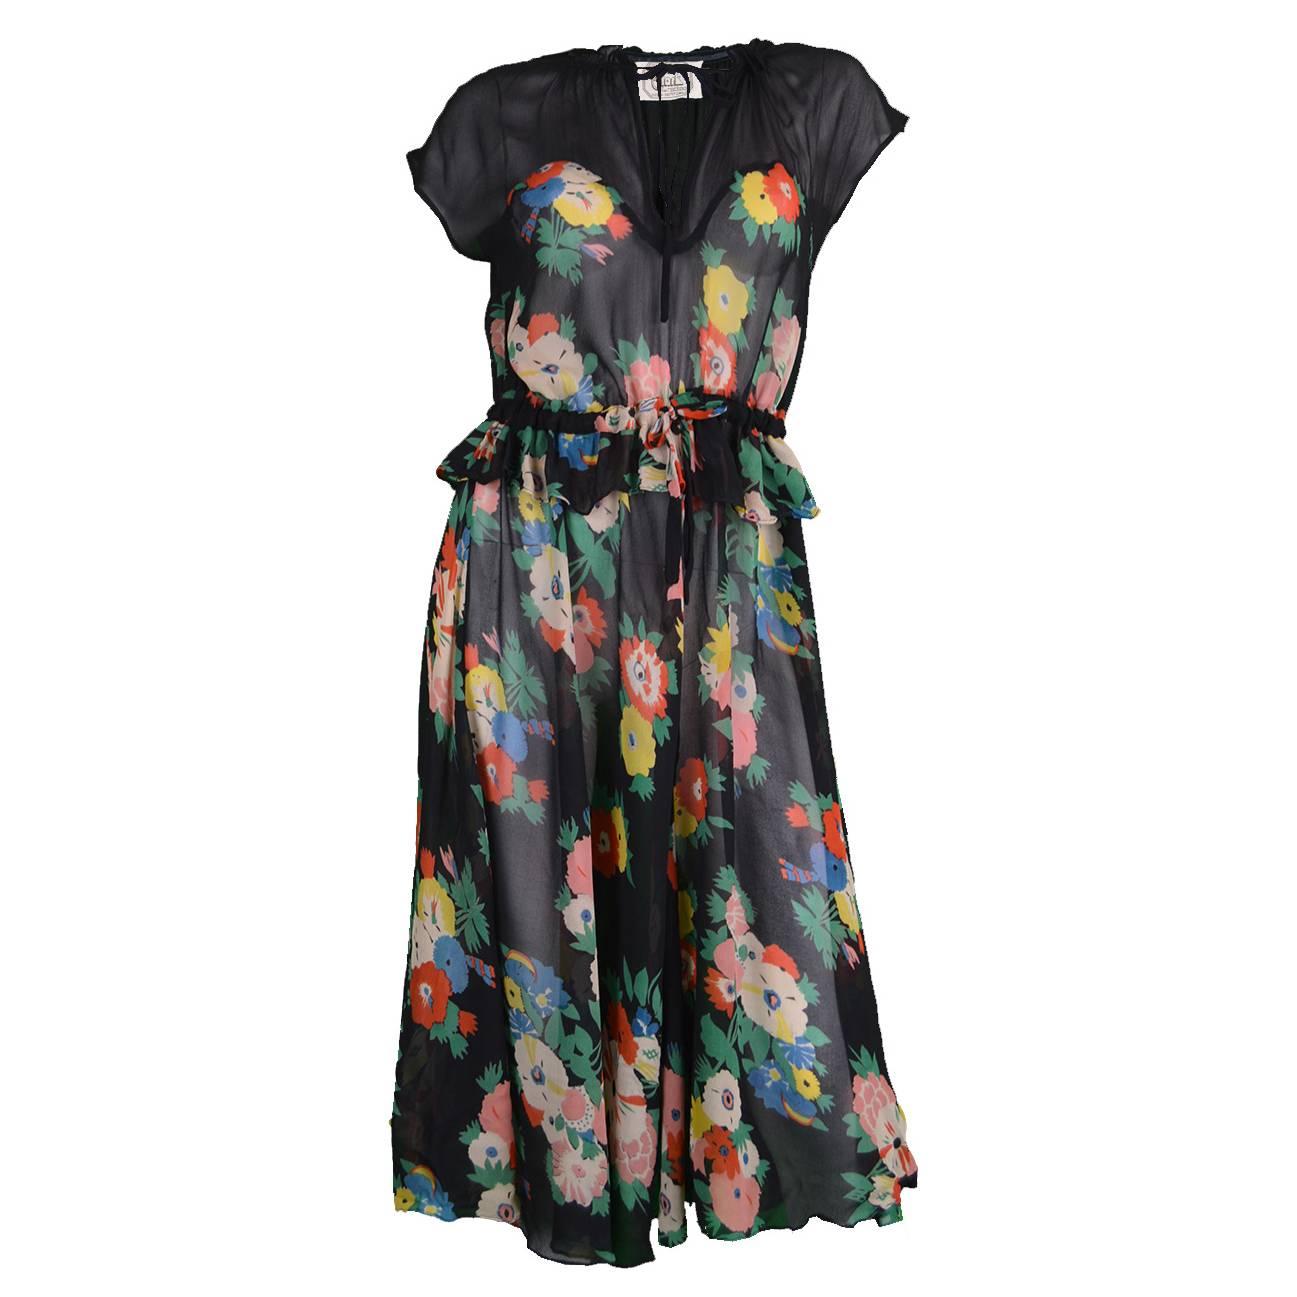 An absolutely incredible vintage dress from the 70s by one of the best and most collectible designers of the 20th Century, Ossie Clark. In a stunning diaphanous black chiffon with an amazing Celia Birtwell floral print throughout. The deep neck and